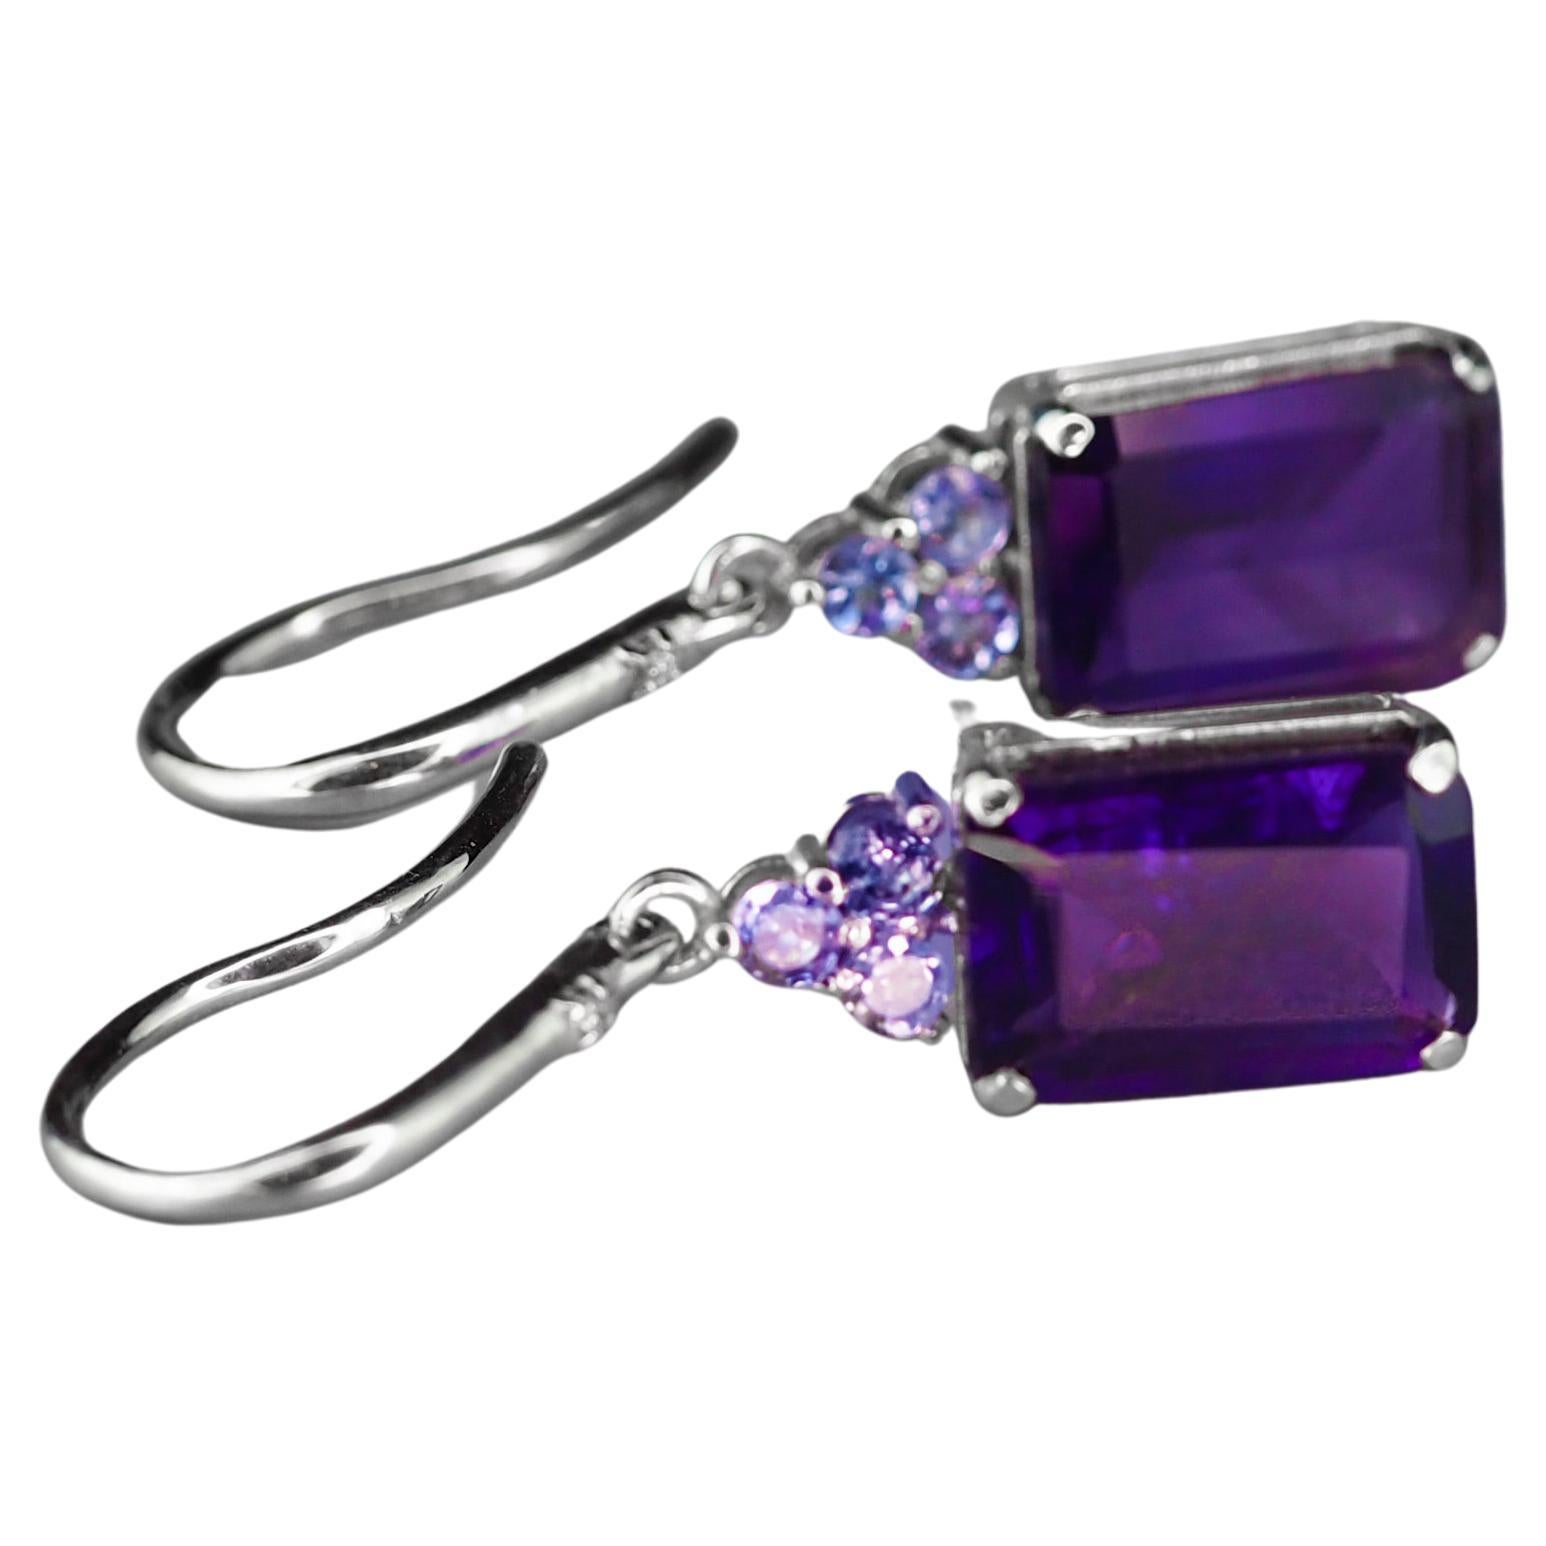 14 kt white solid gold earrings with central  natural amethysts, tanzanites and diamonds. Febrary birthstone.
Weight: 5.3 g.
Size: 33 x 8.5 mm.

Central sotnes: Natural amethysts, color - violet.
Weight: approx 6.00 ct in total, emerald